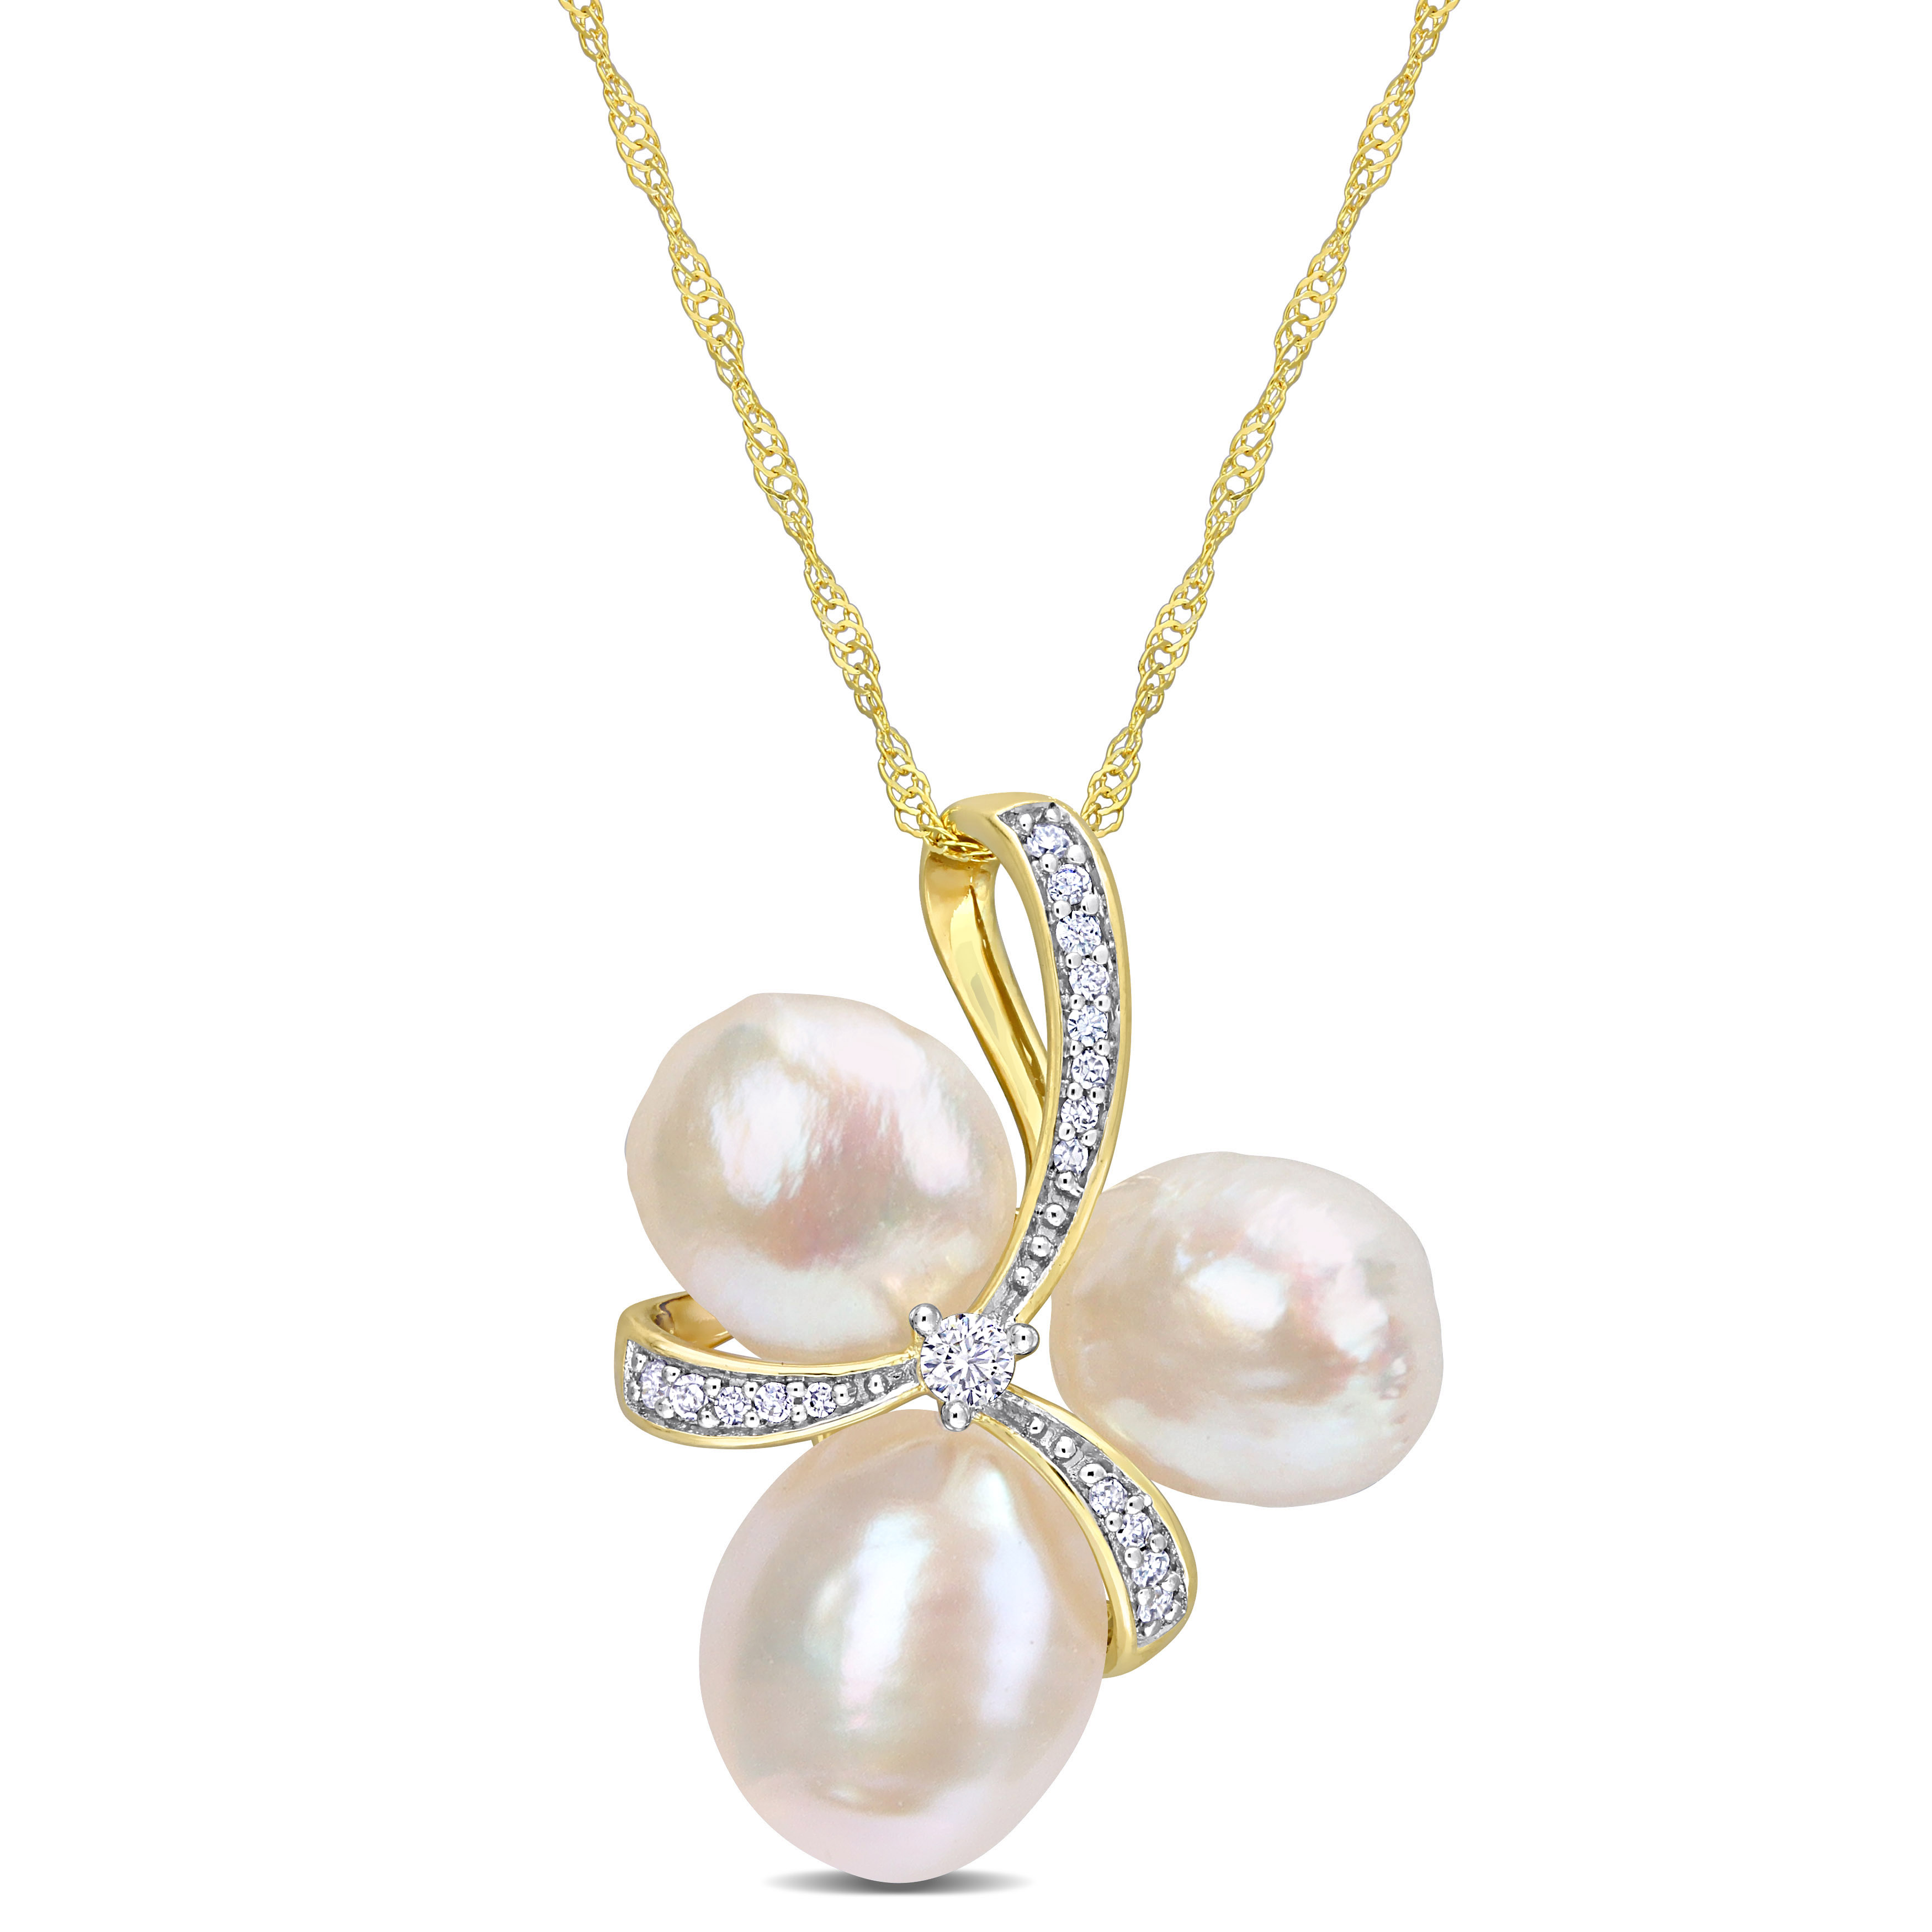 8-8.5 MM & 9-9.5 MM Freshwater Cultured Pearl and 1/10 CT TW Diamond Bow Pendant with Chain in 14k Yellow Gold - 17 in.